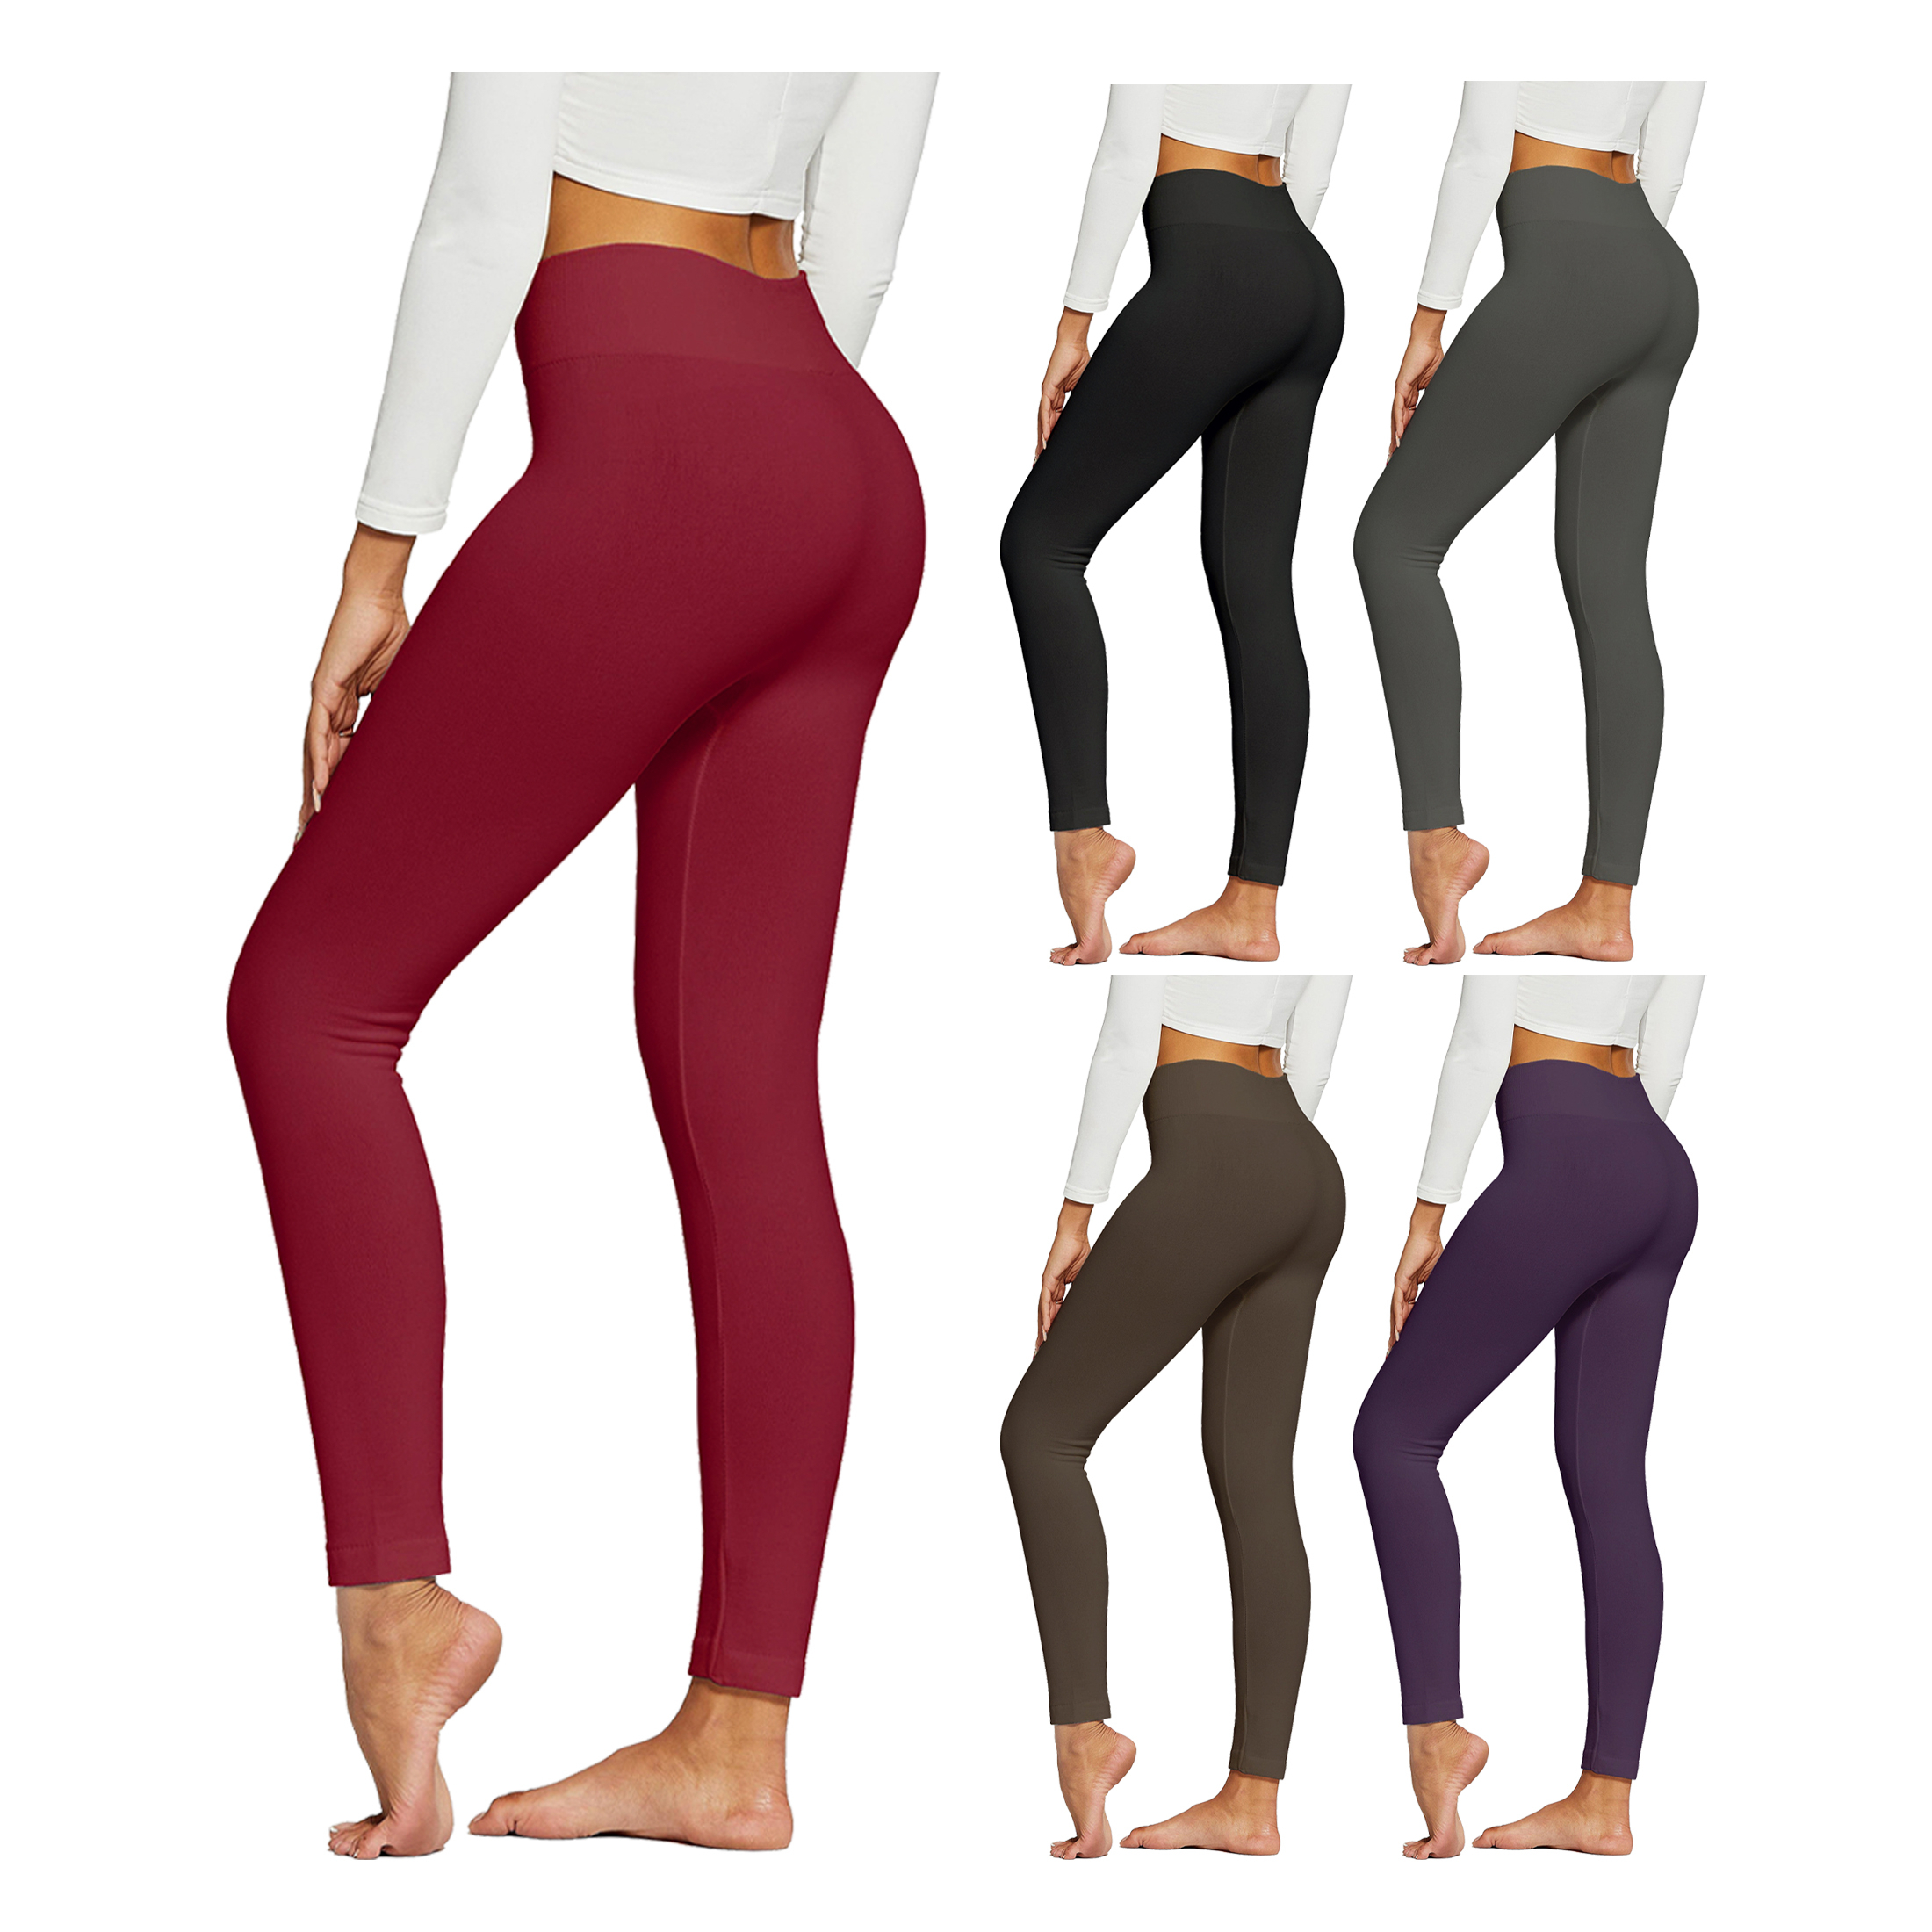 4-Pack:Women's Premium Quality High-Waist Fleece-Lined Leggings (Plus Size Available) - Assorted, Small/Medium